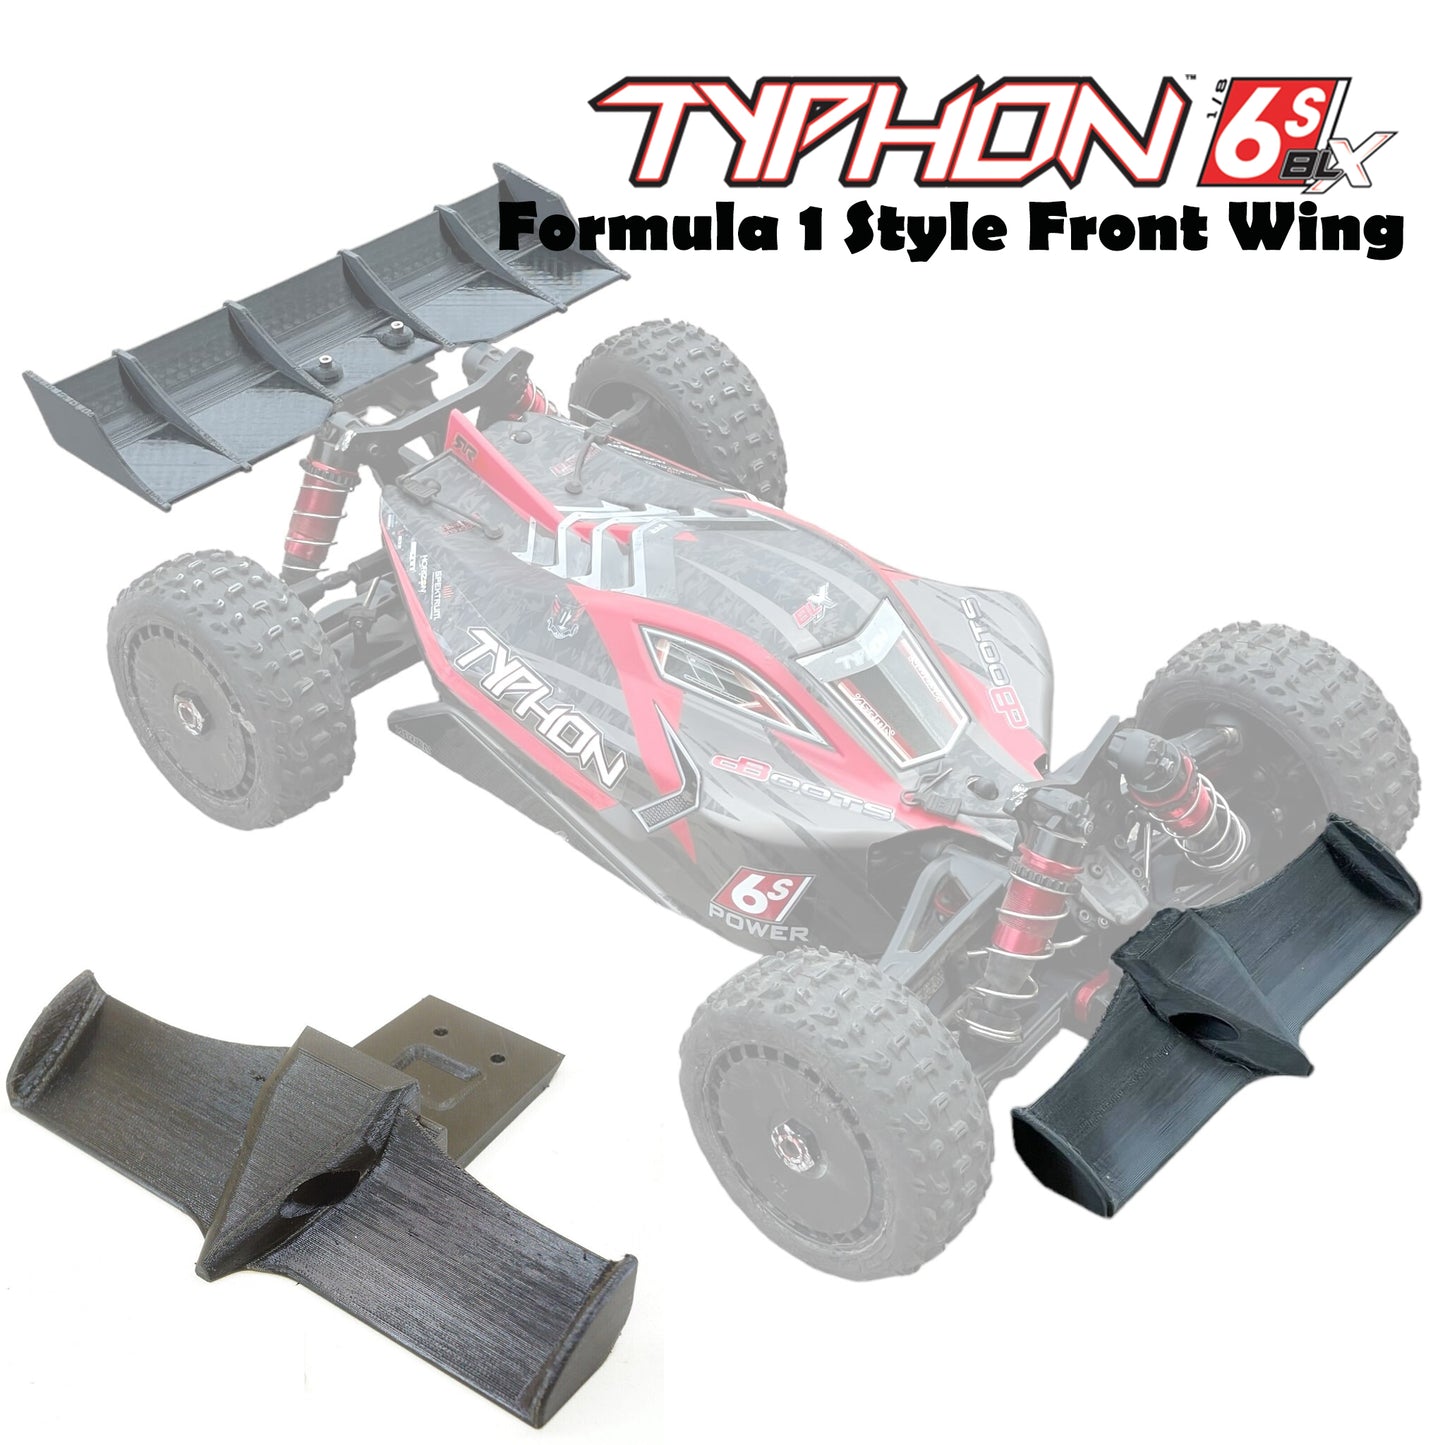 Formula F1 Aero Style Front Wing For Arrma Typhon 6s BLX